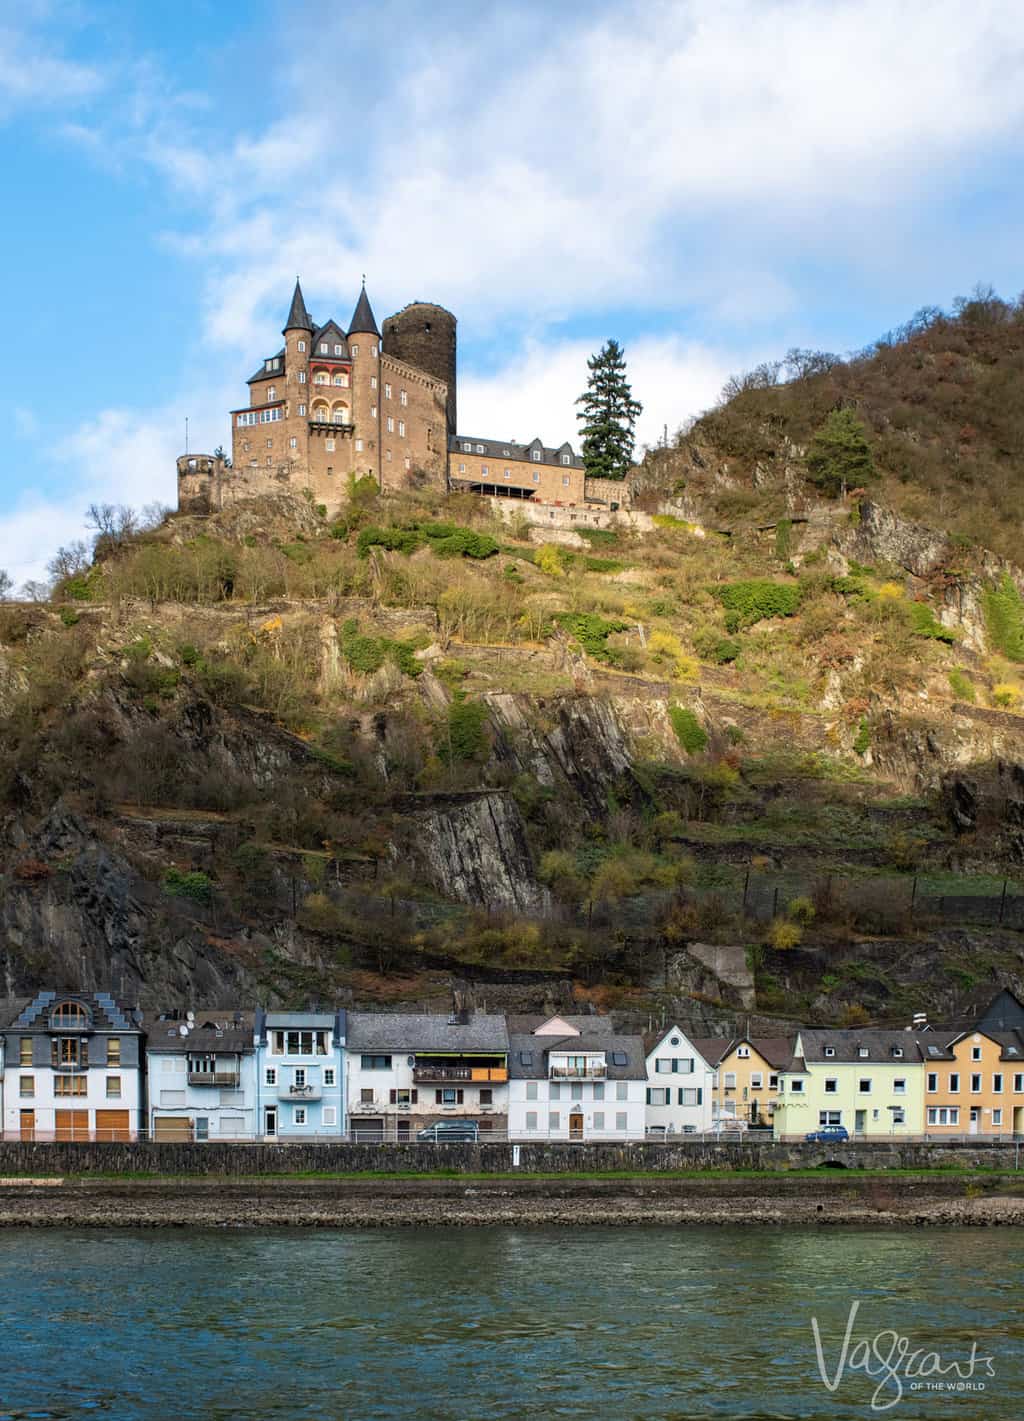 A castle perched on top of a rocky outcrop above a small village on a river bank in Germany. 